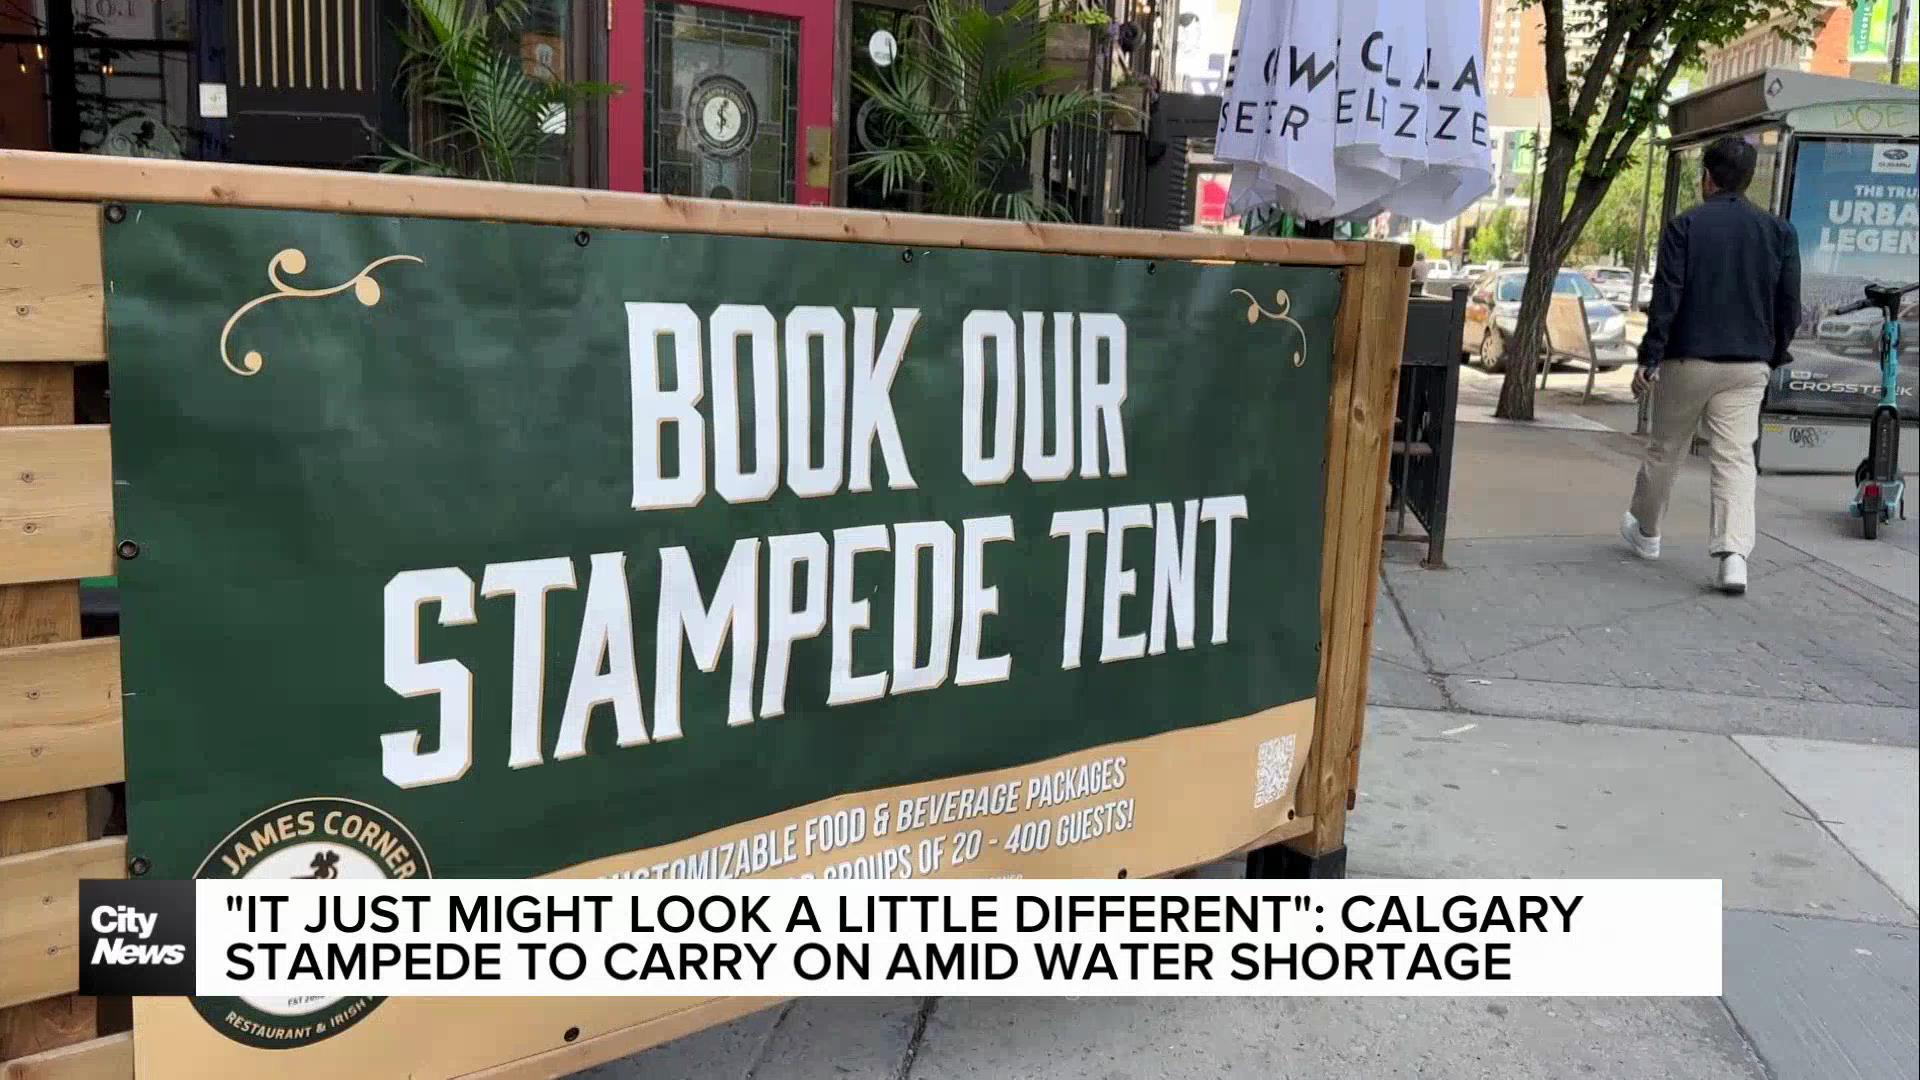 "It just might look a little different": Calgary Stampede to carry on amid water shortage